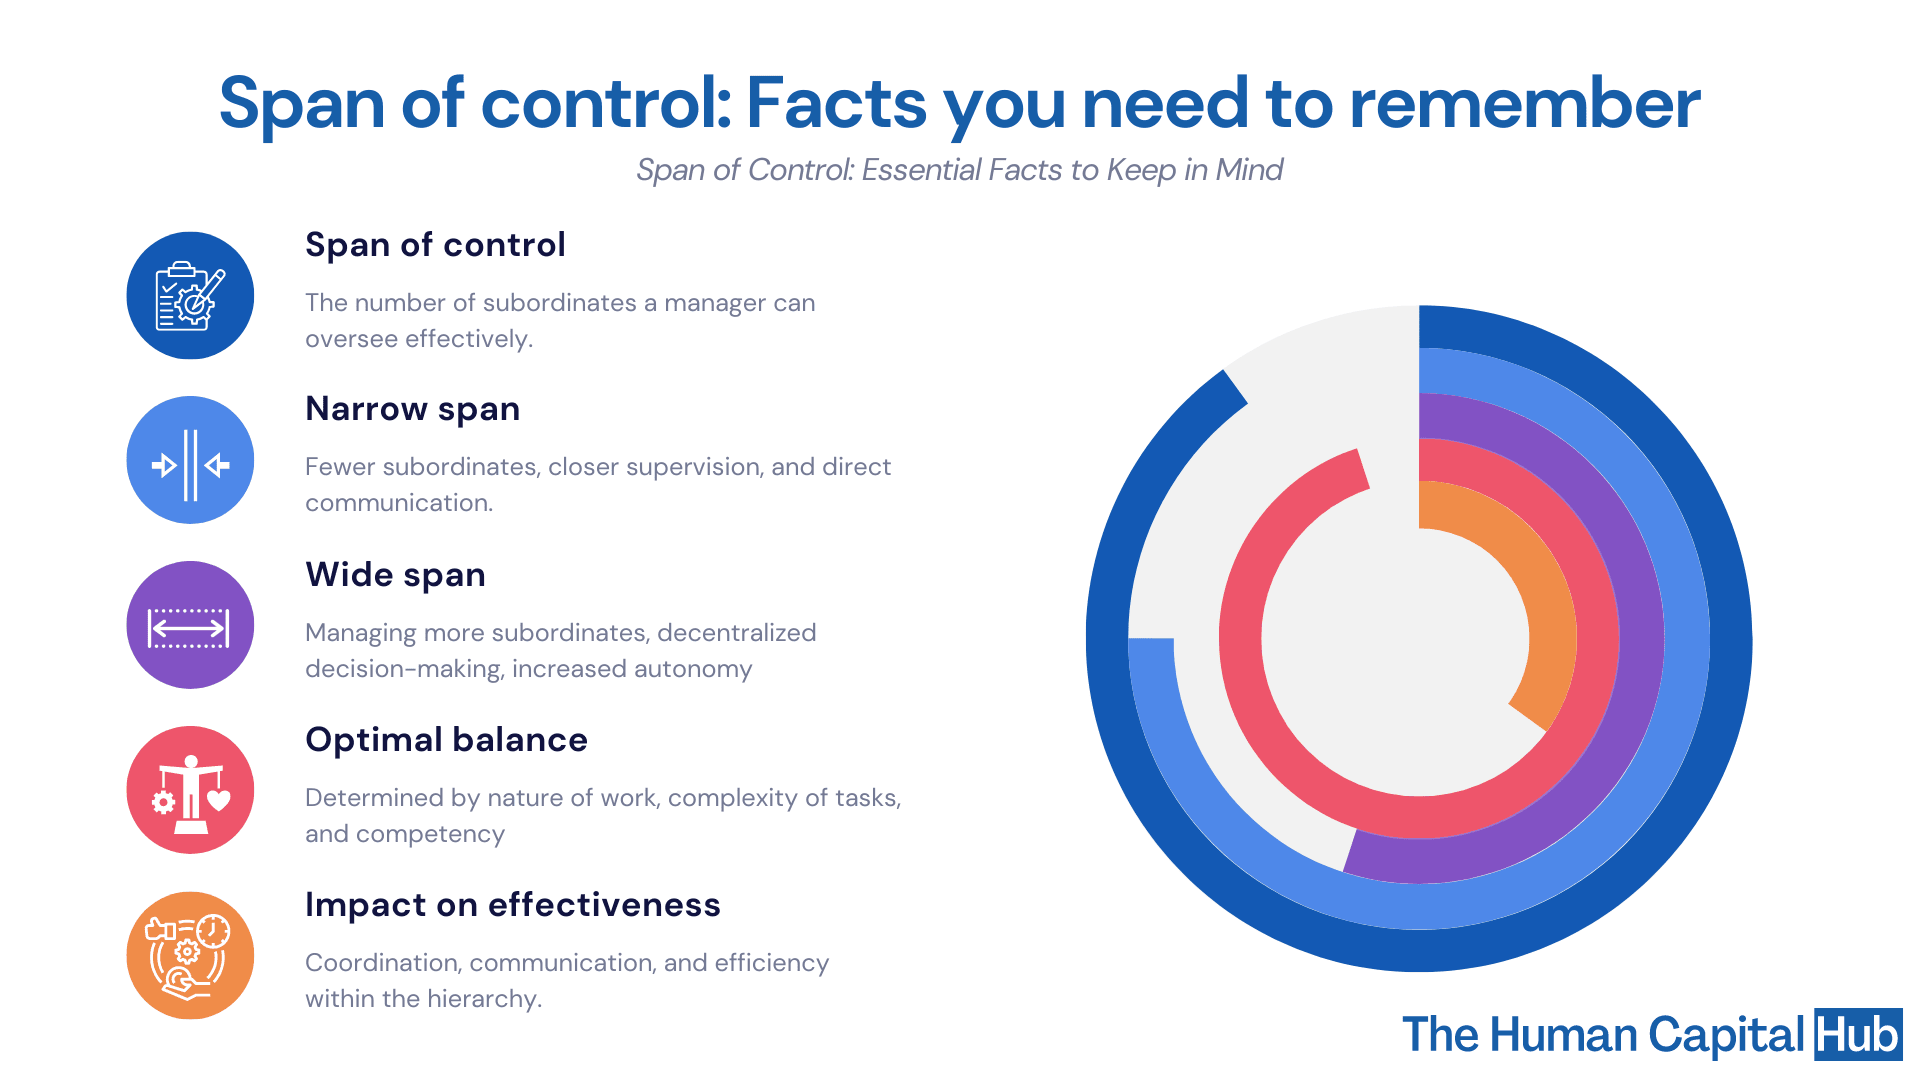 17 span of control: Facts you need to remember all the time